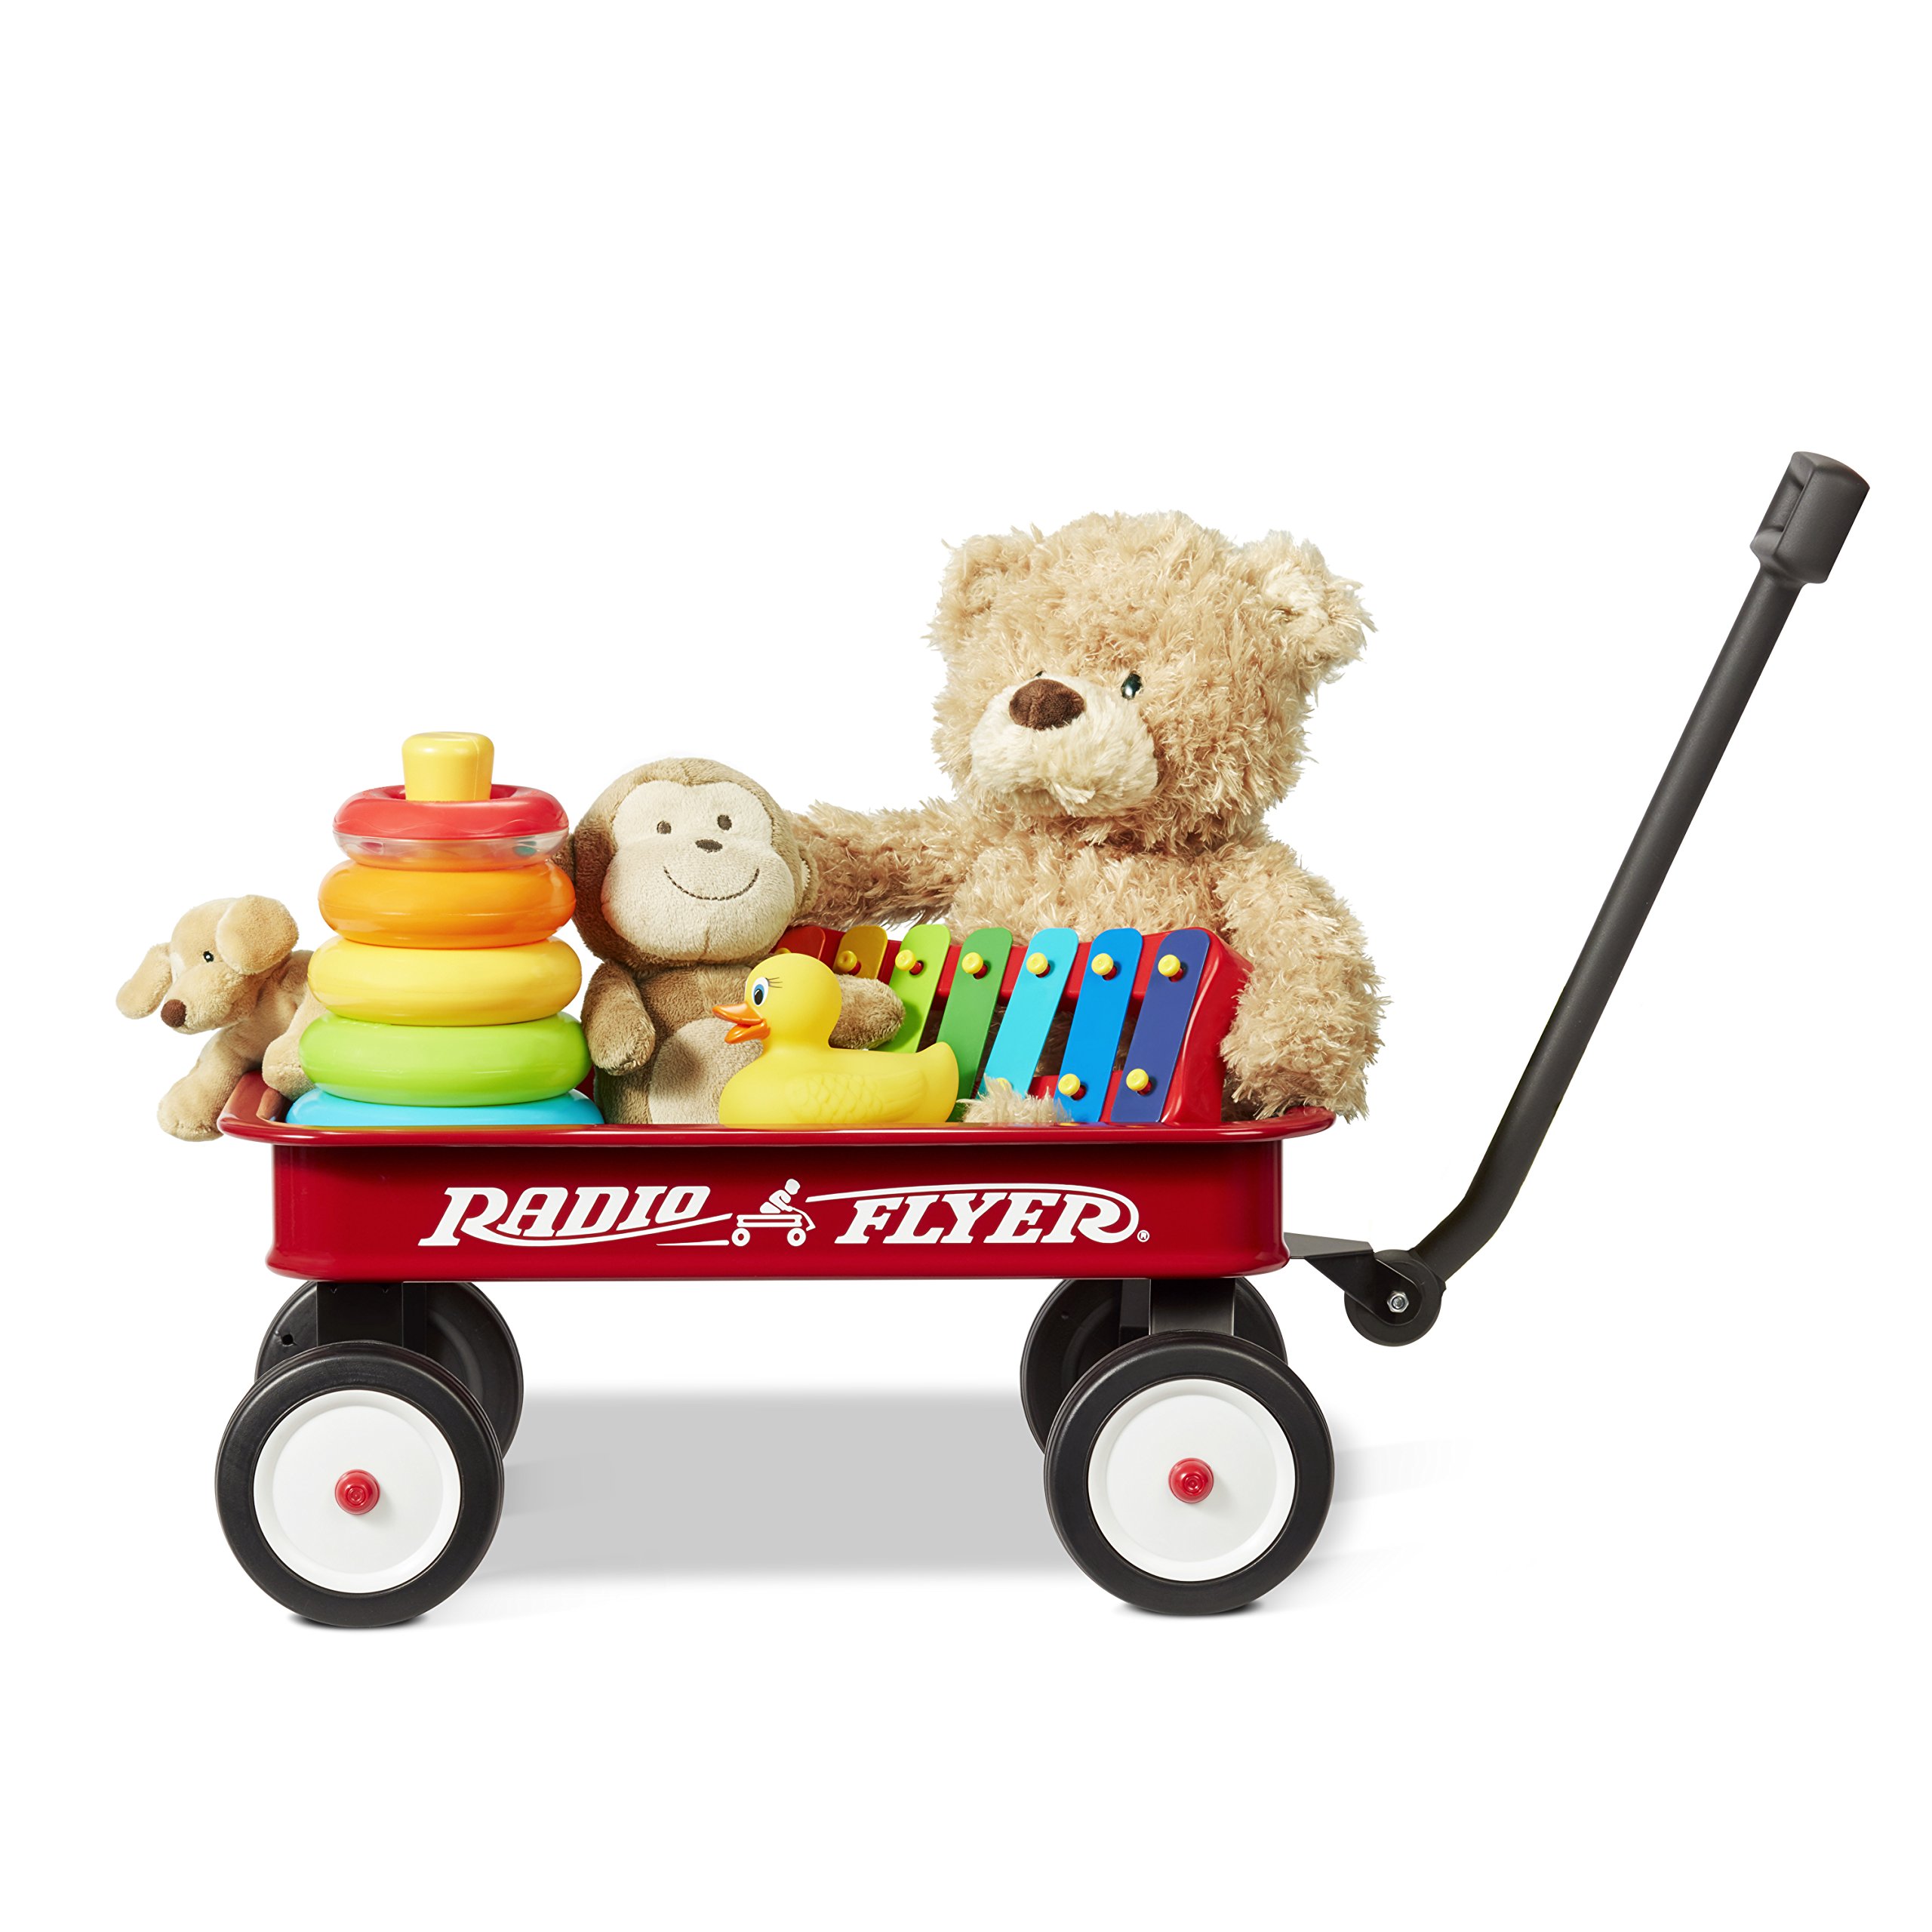 Radio Flyer 16.5 Inch Long My 1st Wagon Toy, For Ages 1.5+, Red